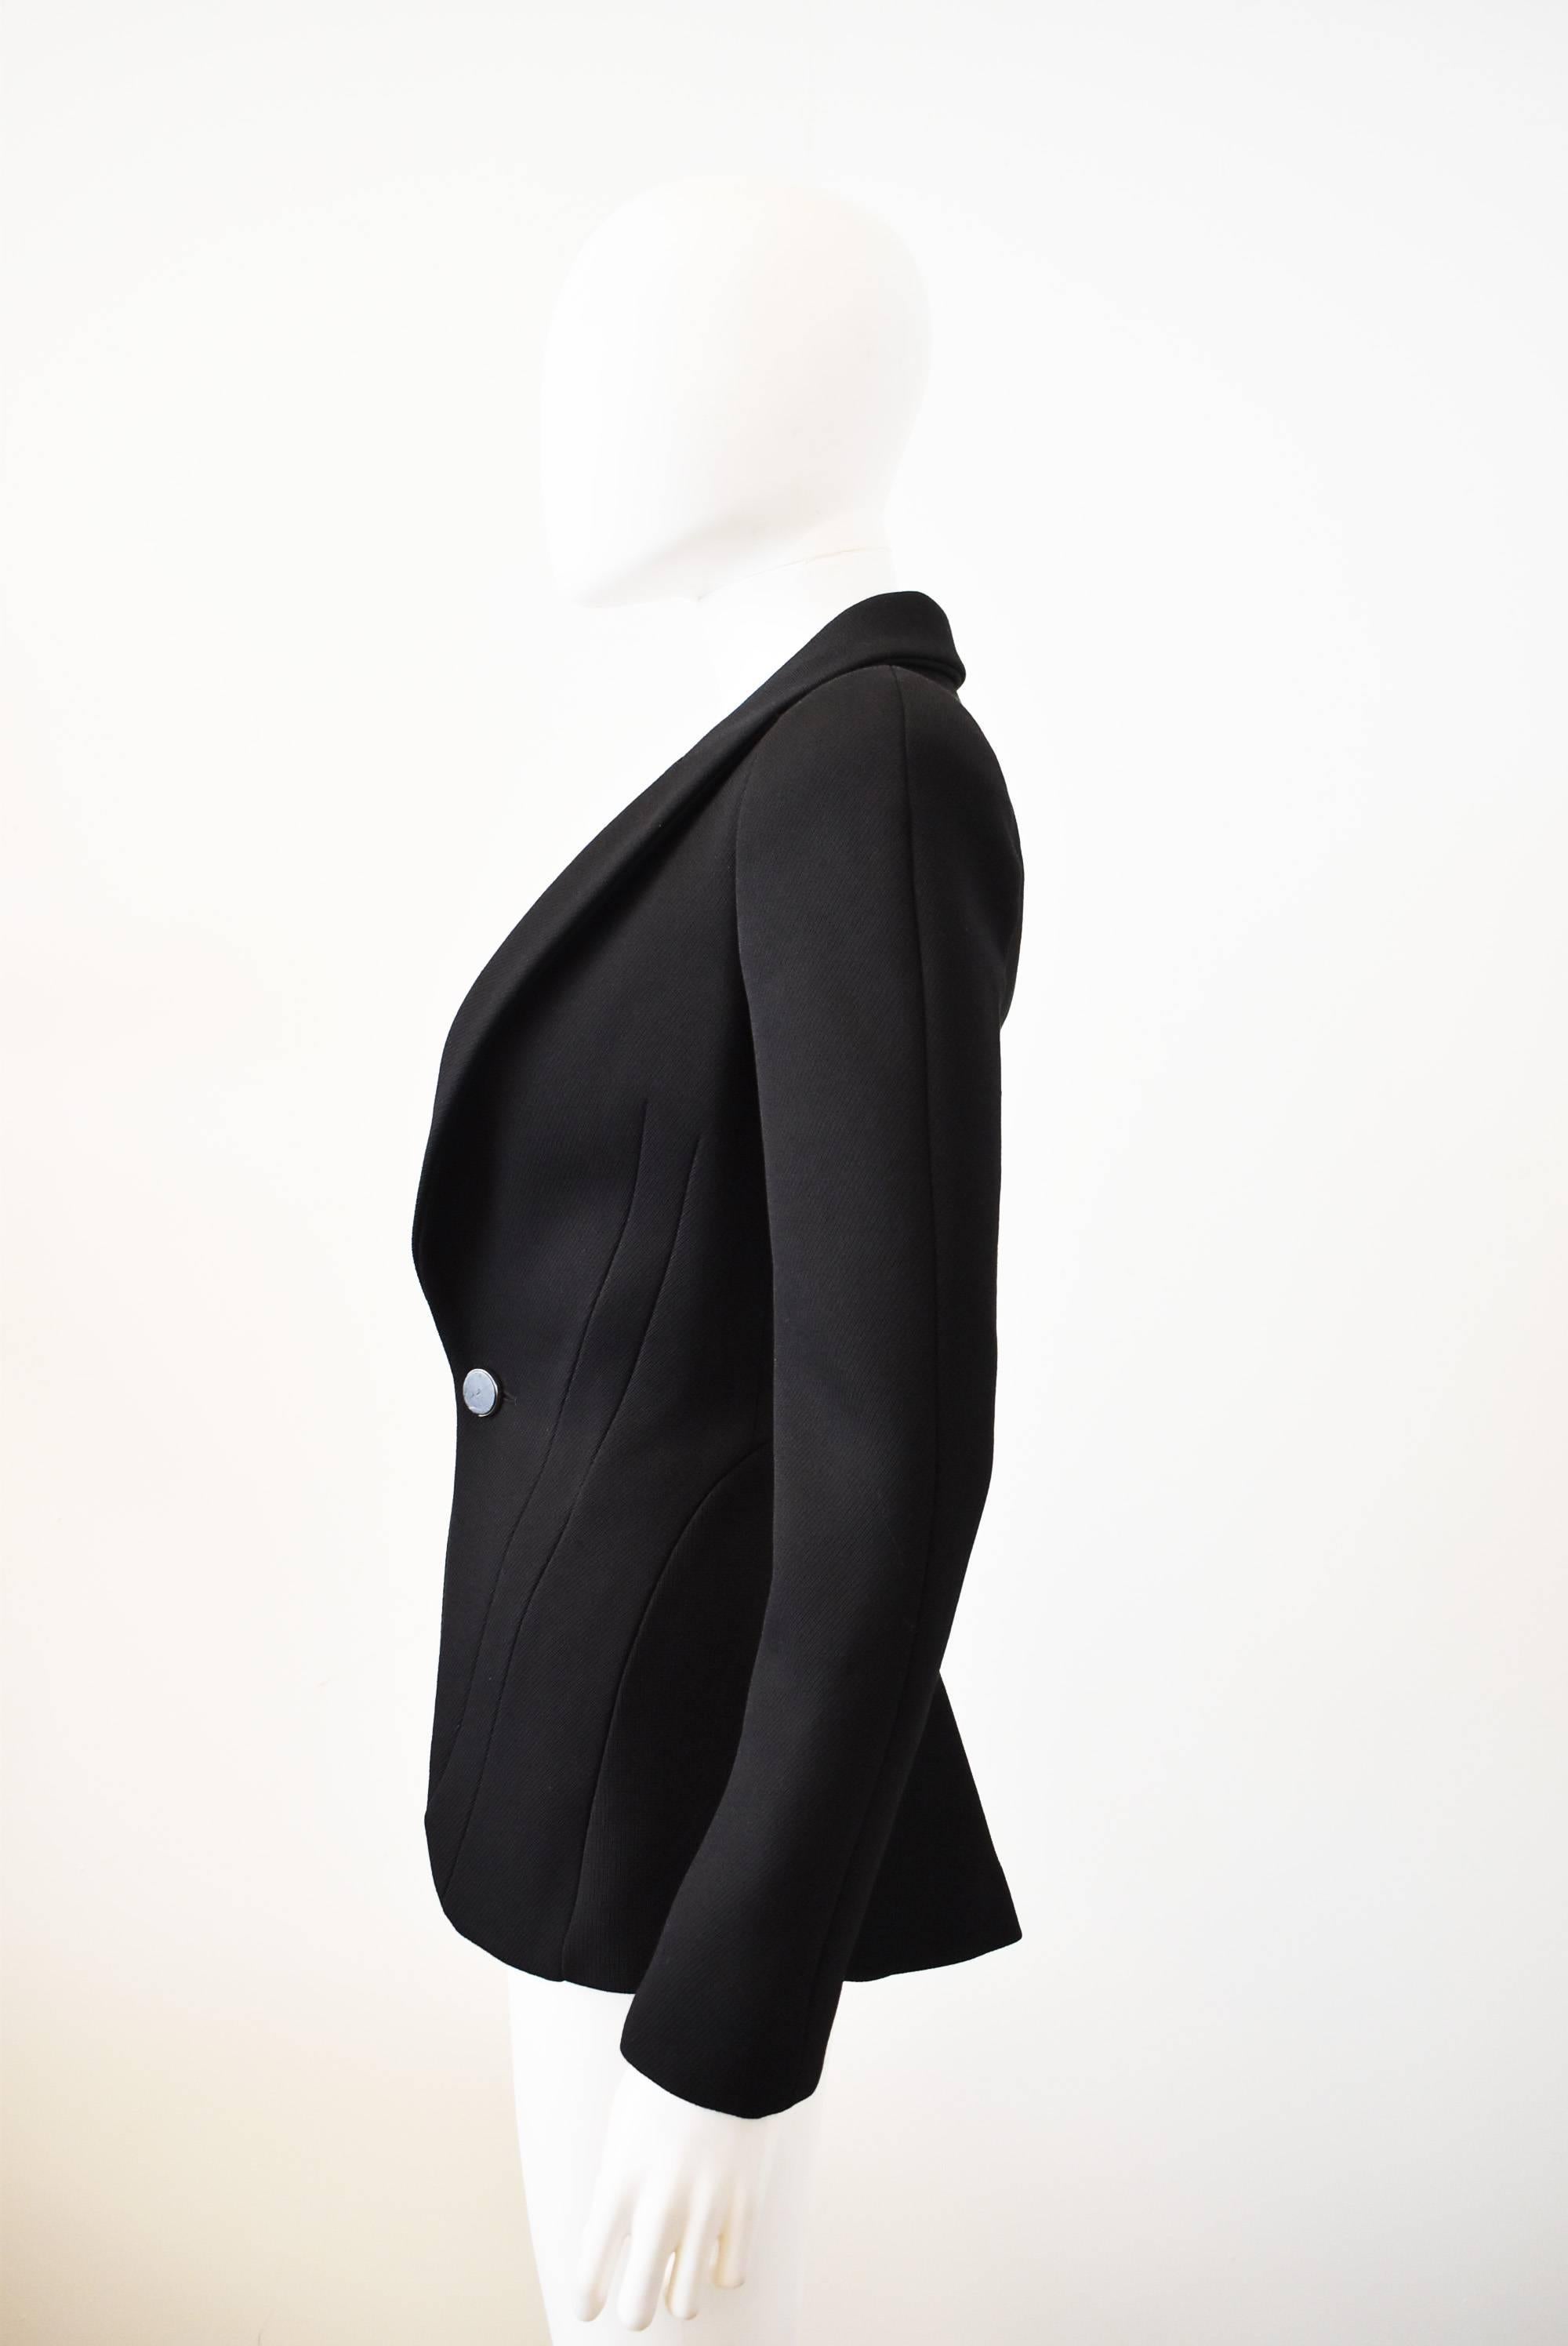 A beautiful and dramatically tailored jacket by Alexander McQueen. The jacket has an extremely fitted shape with shoulder pads, darts and seams nipping in the waist to create an hourglass silhouette. The jacket has an open front with a single